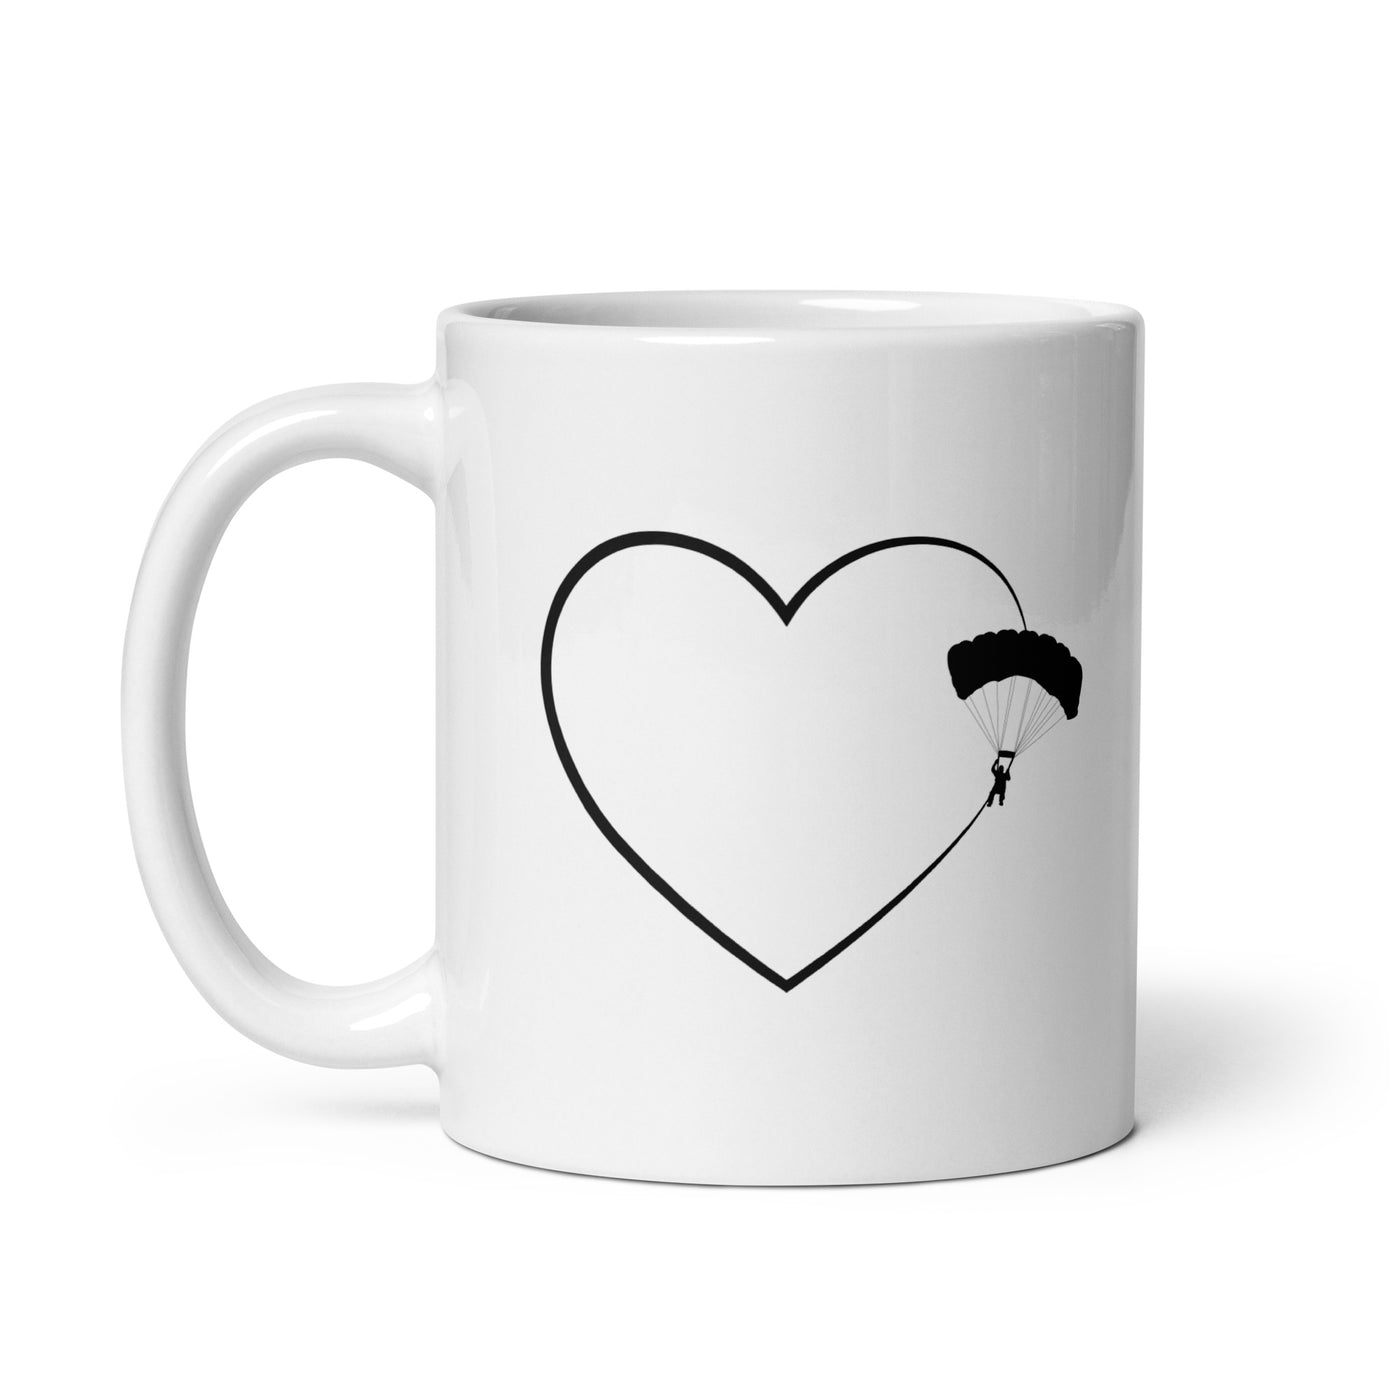 Heart 2 And Paragliding - Tasse berge 11oz